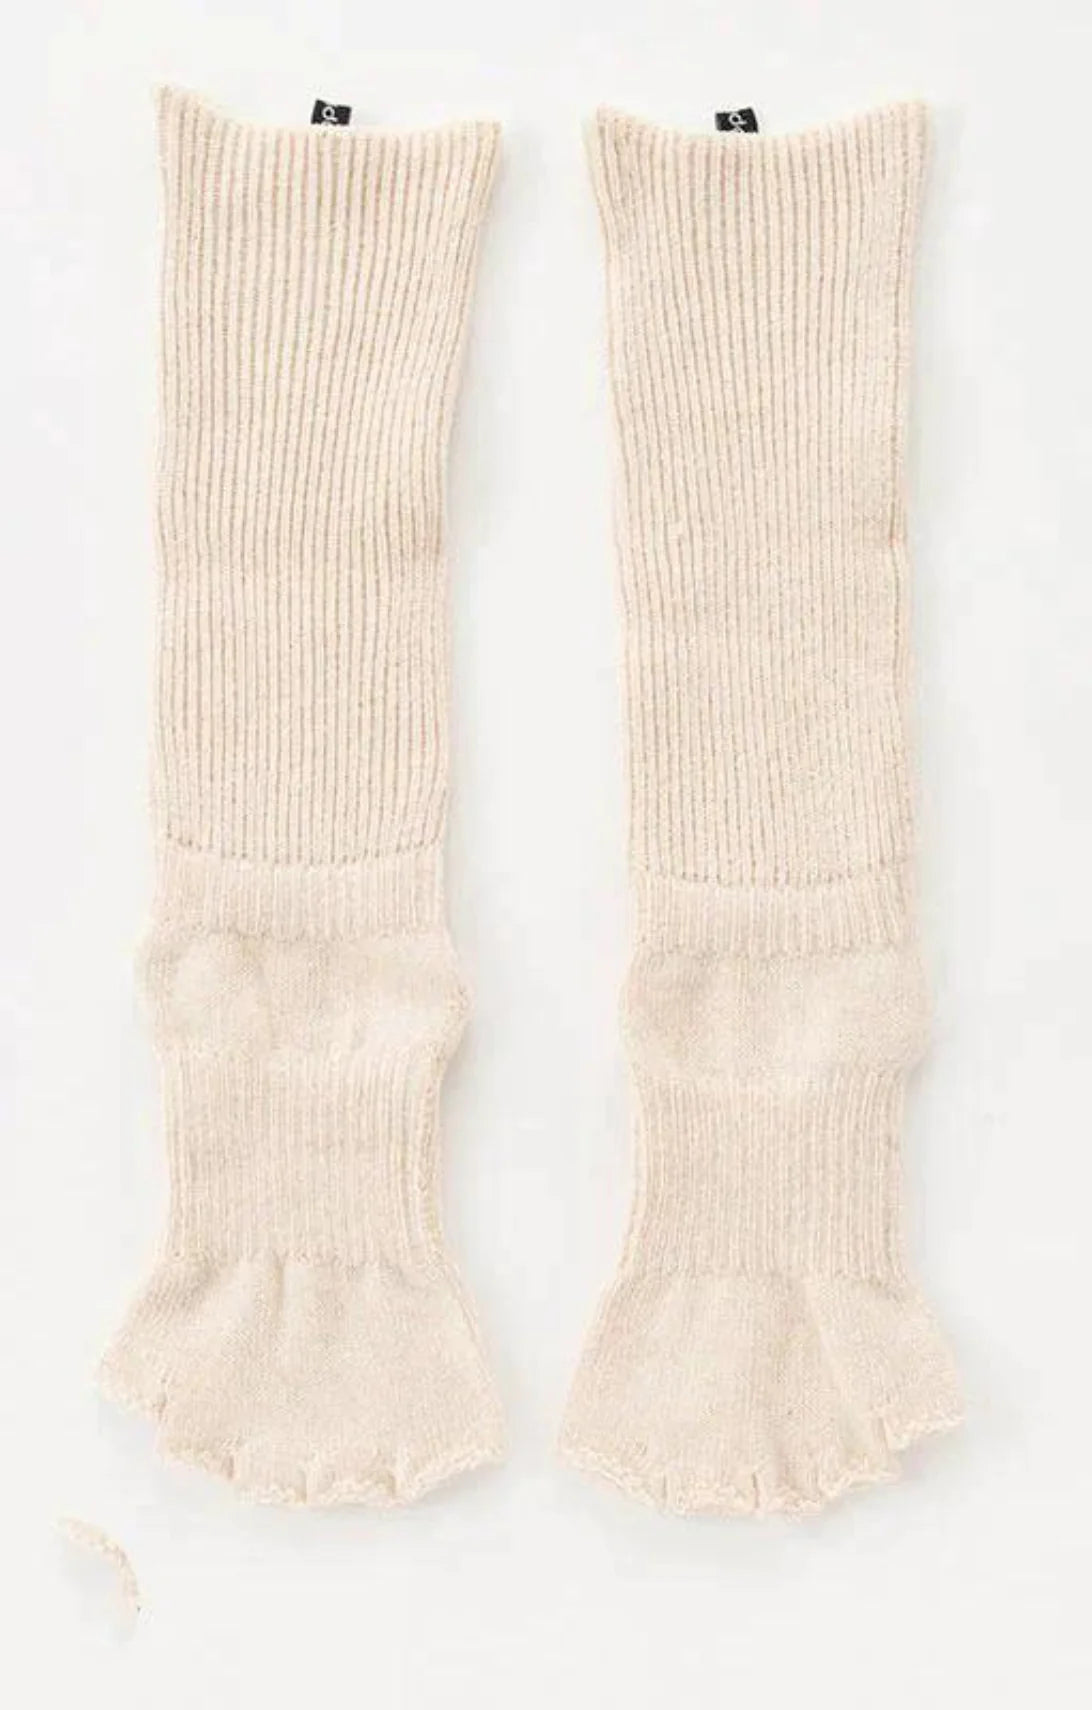 Front side of Knitido plus brand Organic Cotton Botanical Dyed Open Toe and Heel Grip Socks in ivory color